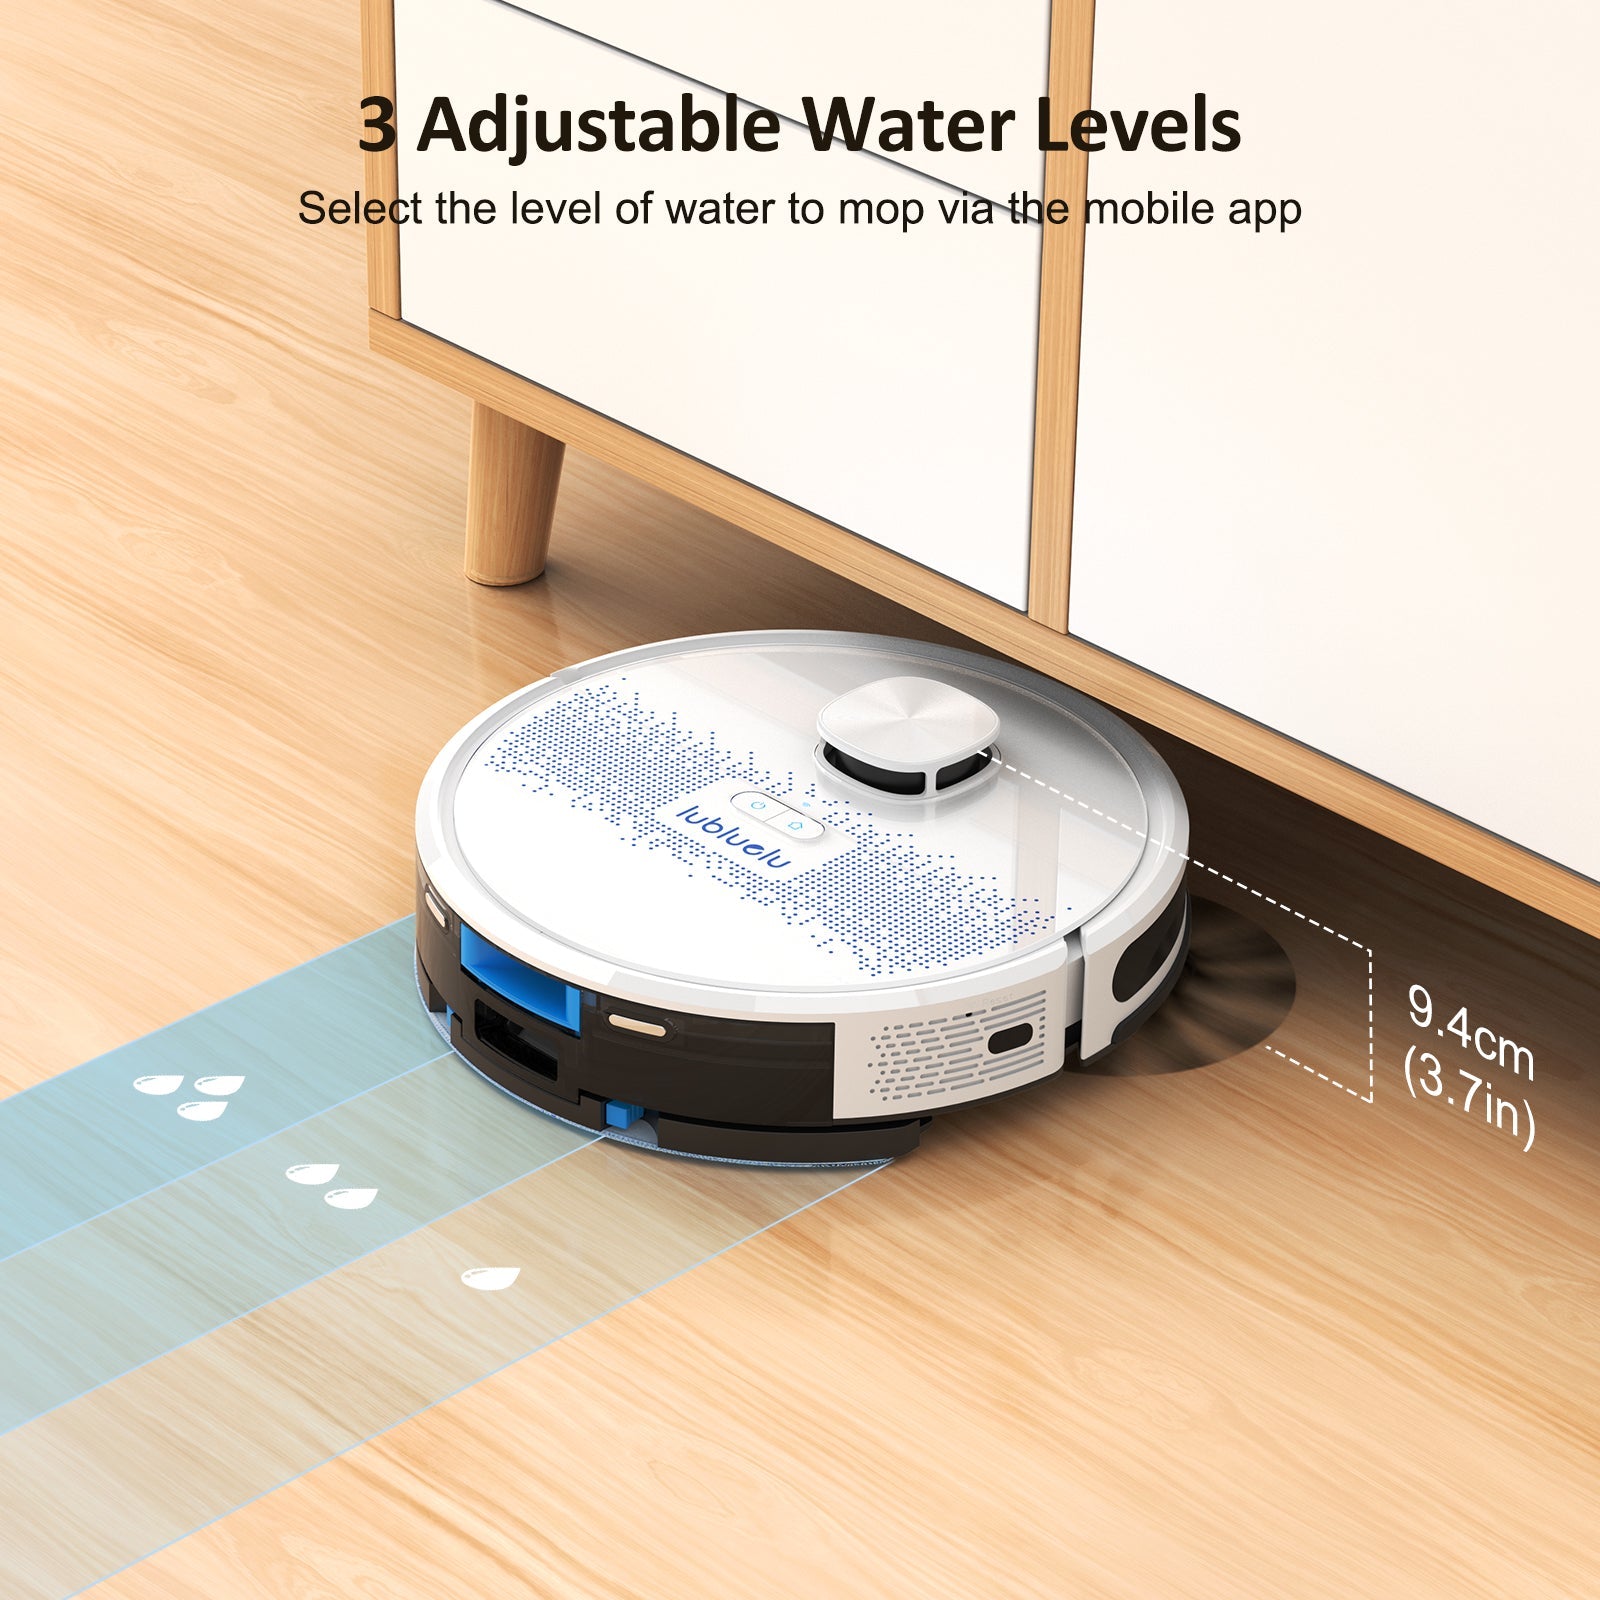 lubluelu SL60D 2 in 1 Robot Vacuum and Mop Combo Cleaner